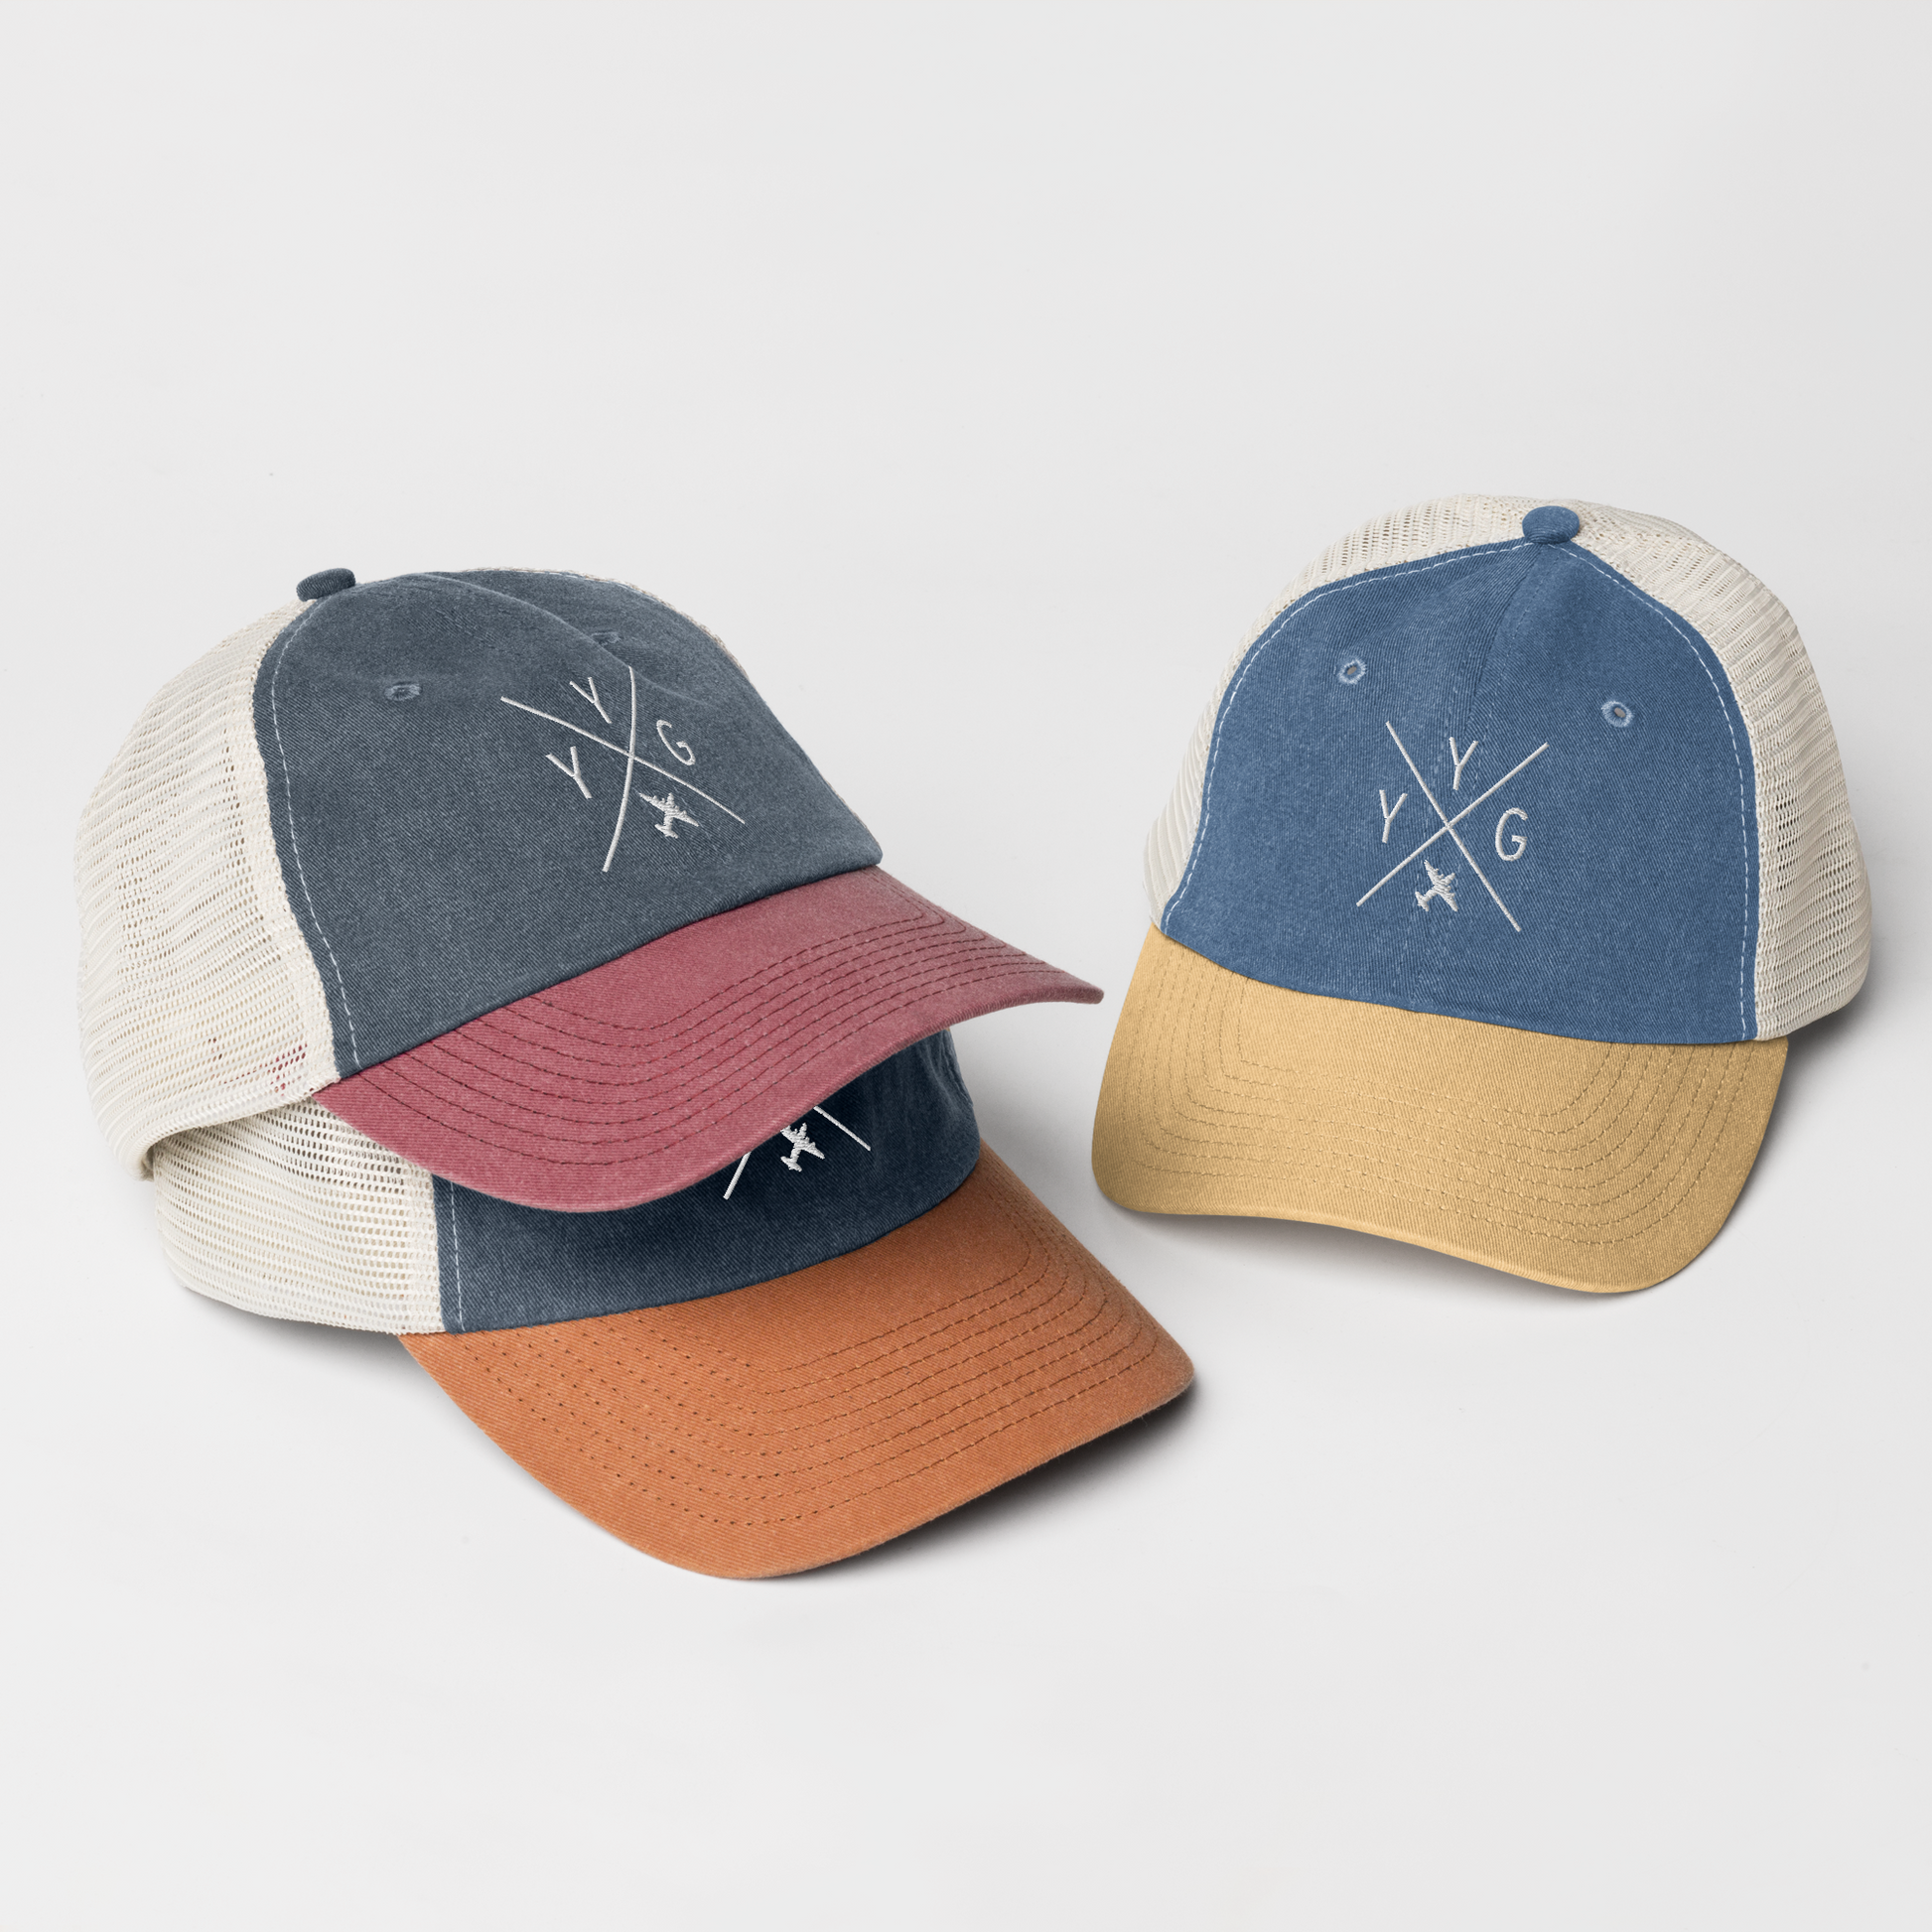 YHM Designs - YYG Charlottetown Pigment-Dyed Trucker Cap - Crossed-X Design with Airport Code and Vintage Propliner - White Embroidery - Image 05